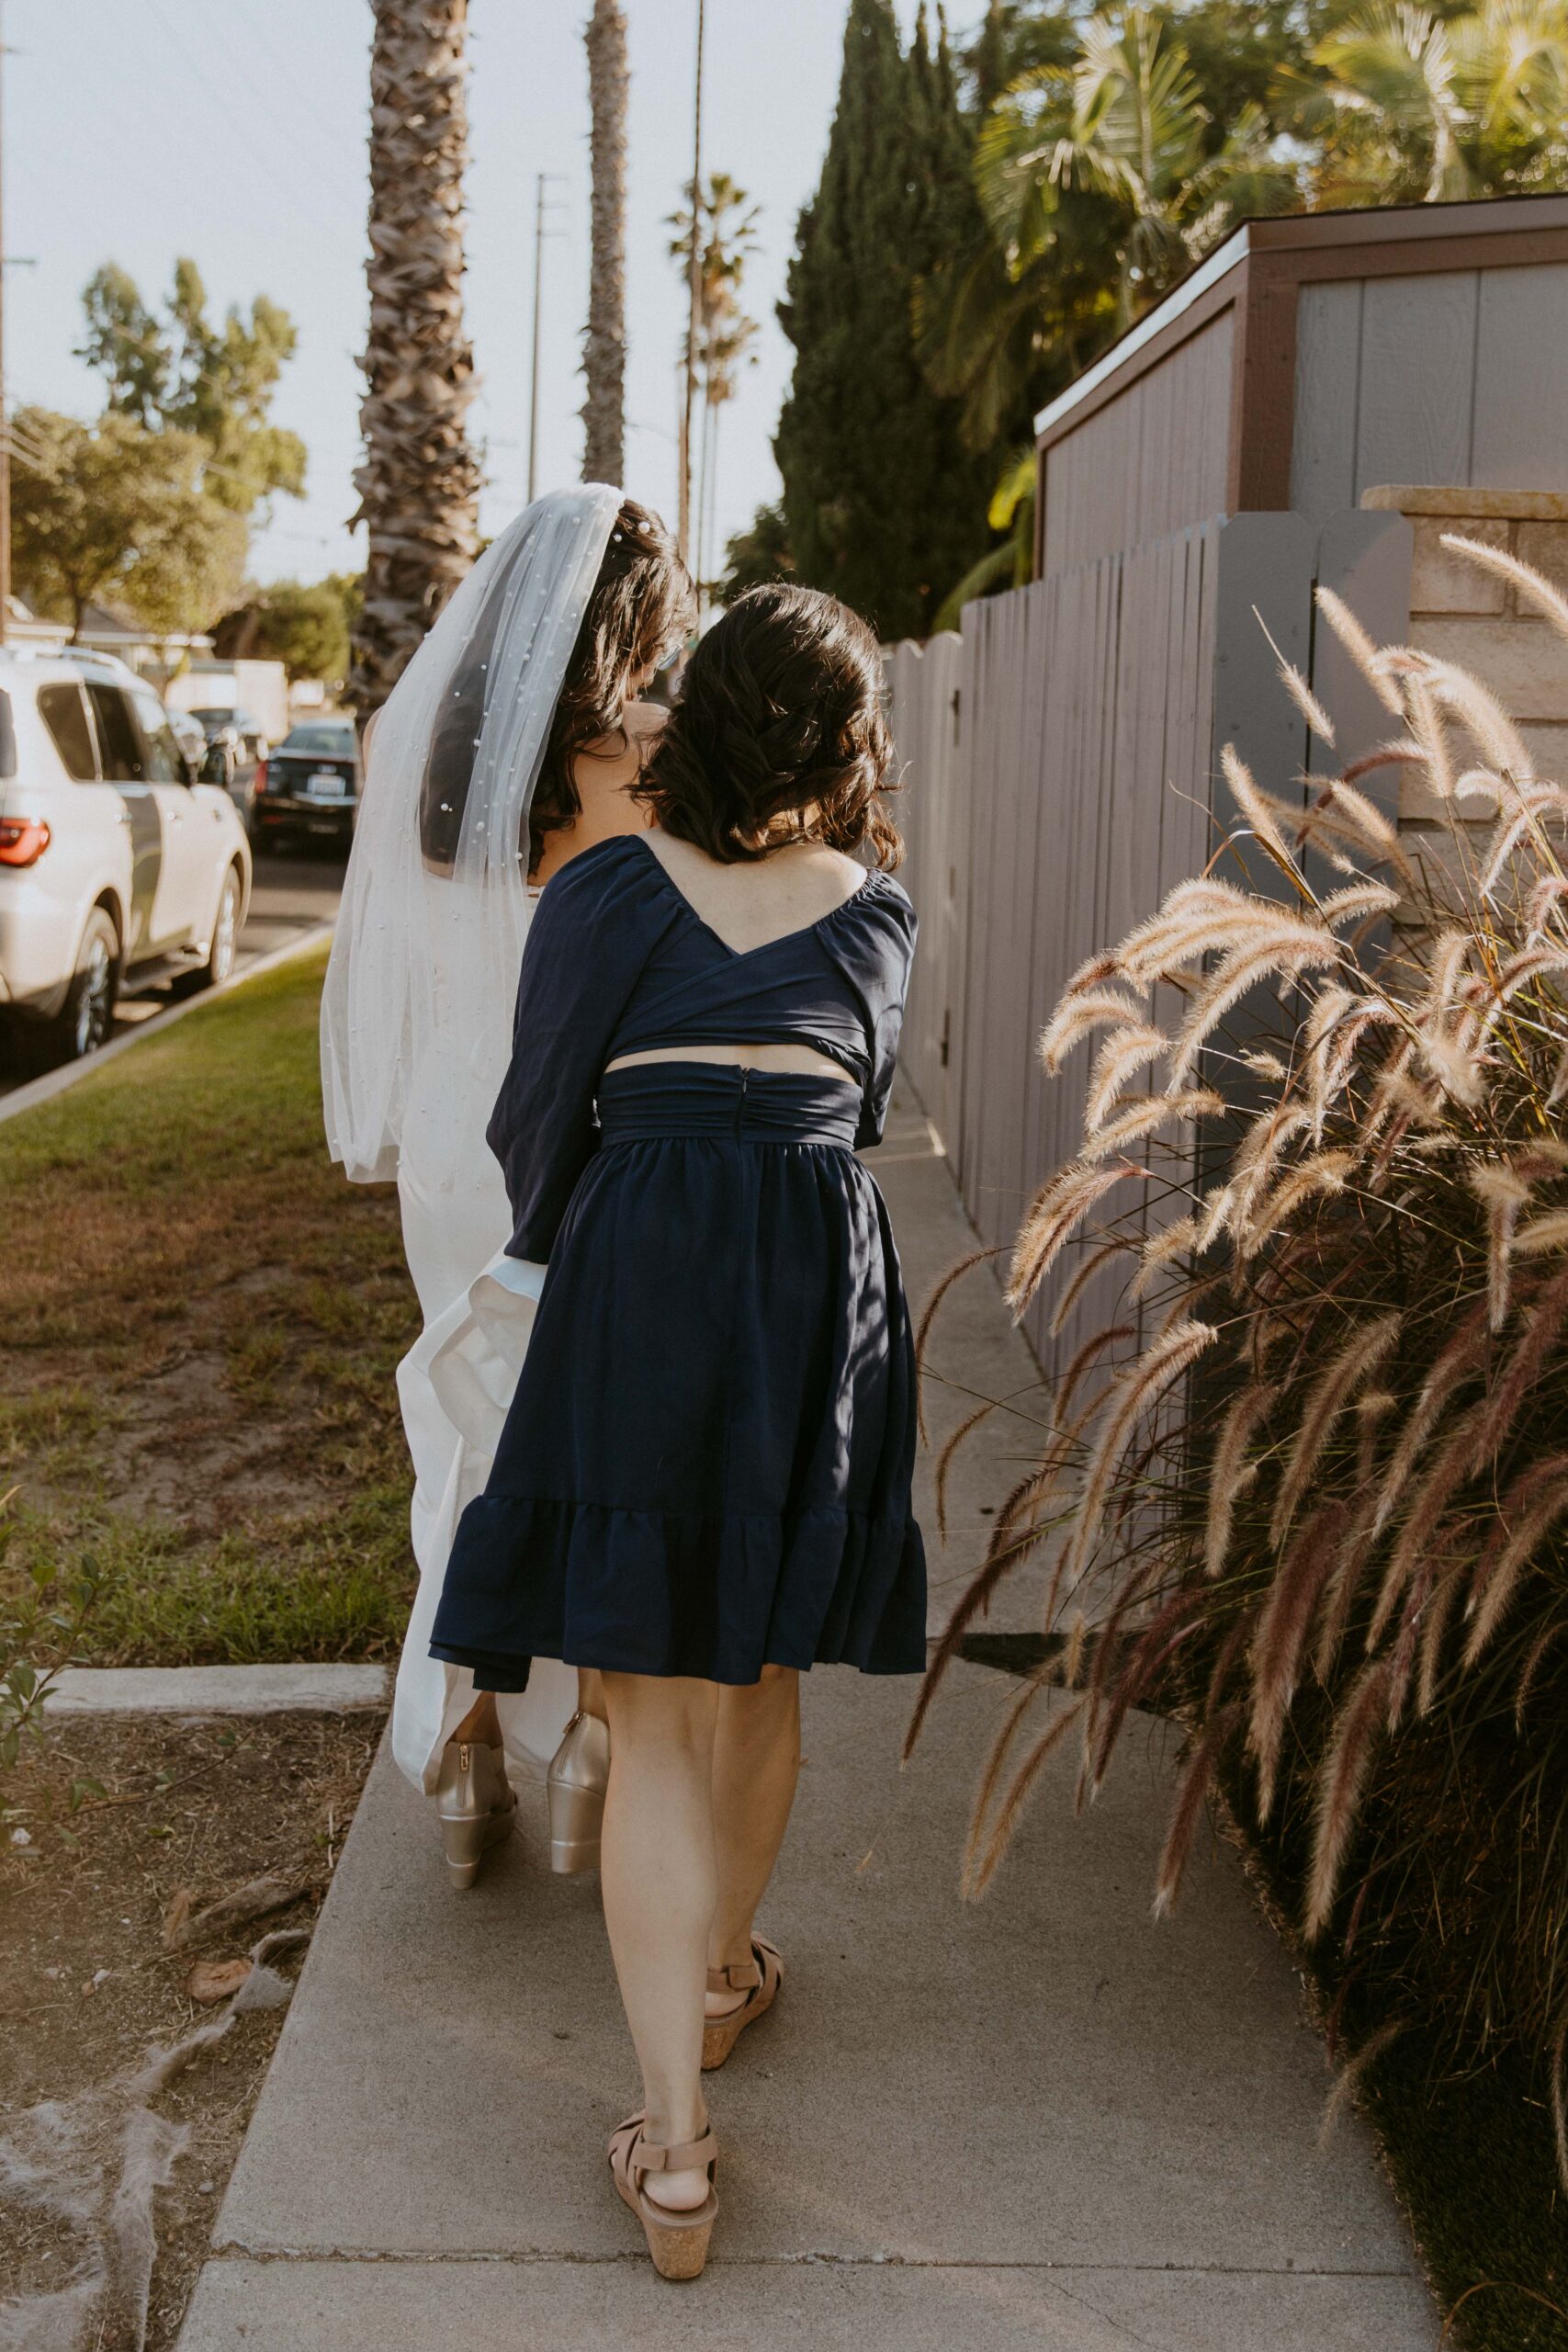 A bride and her attendant walking side by side on a sidewalk, with the bride carrying her veil and both women facing away from the camera.